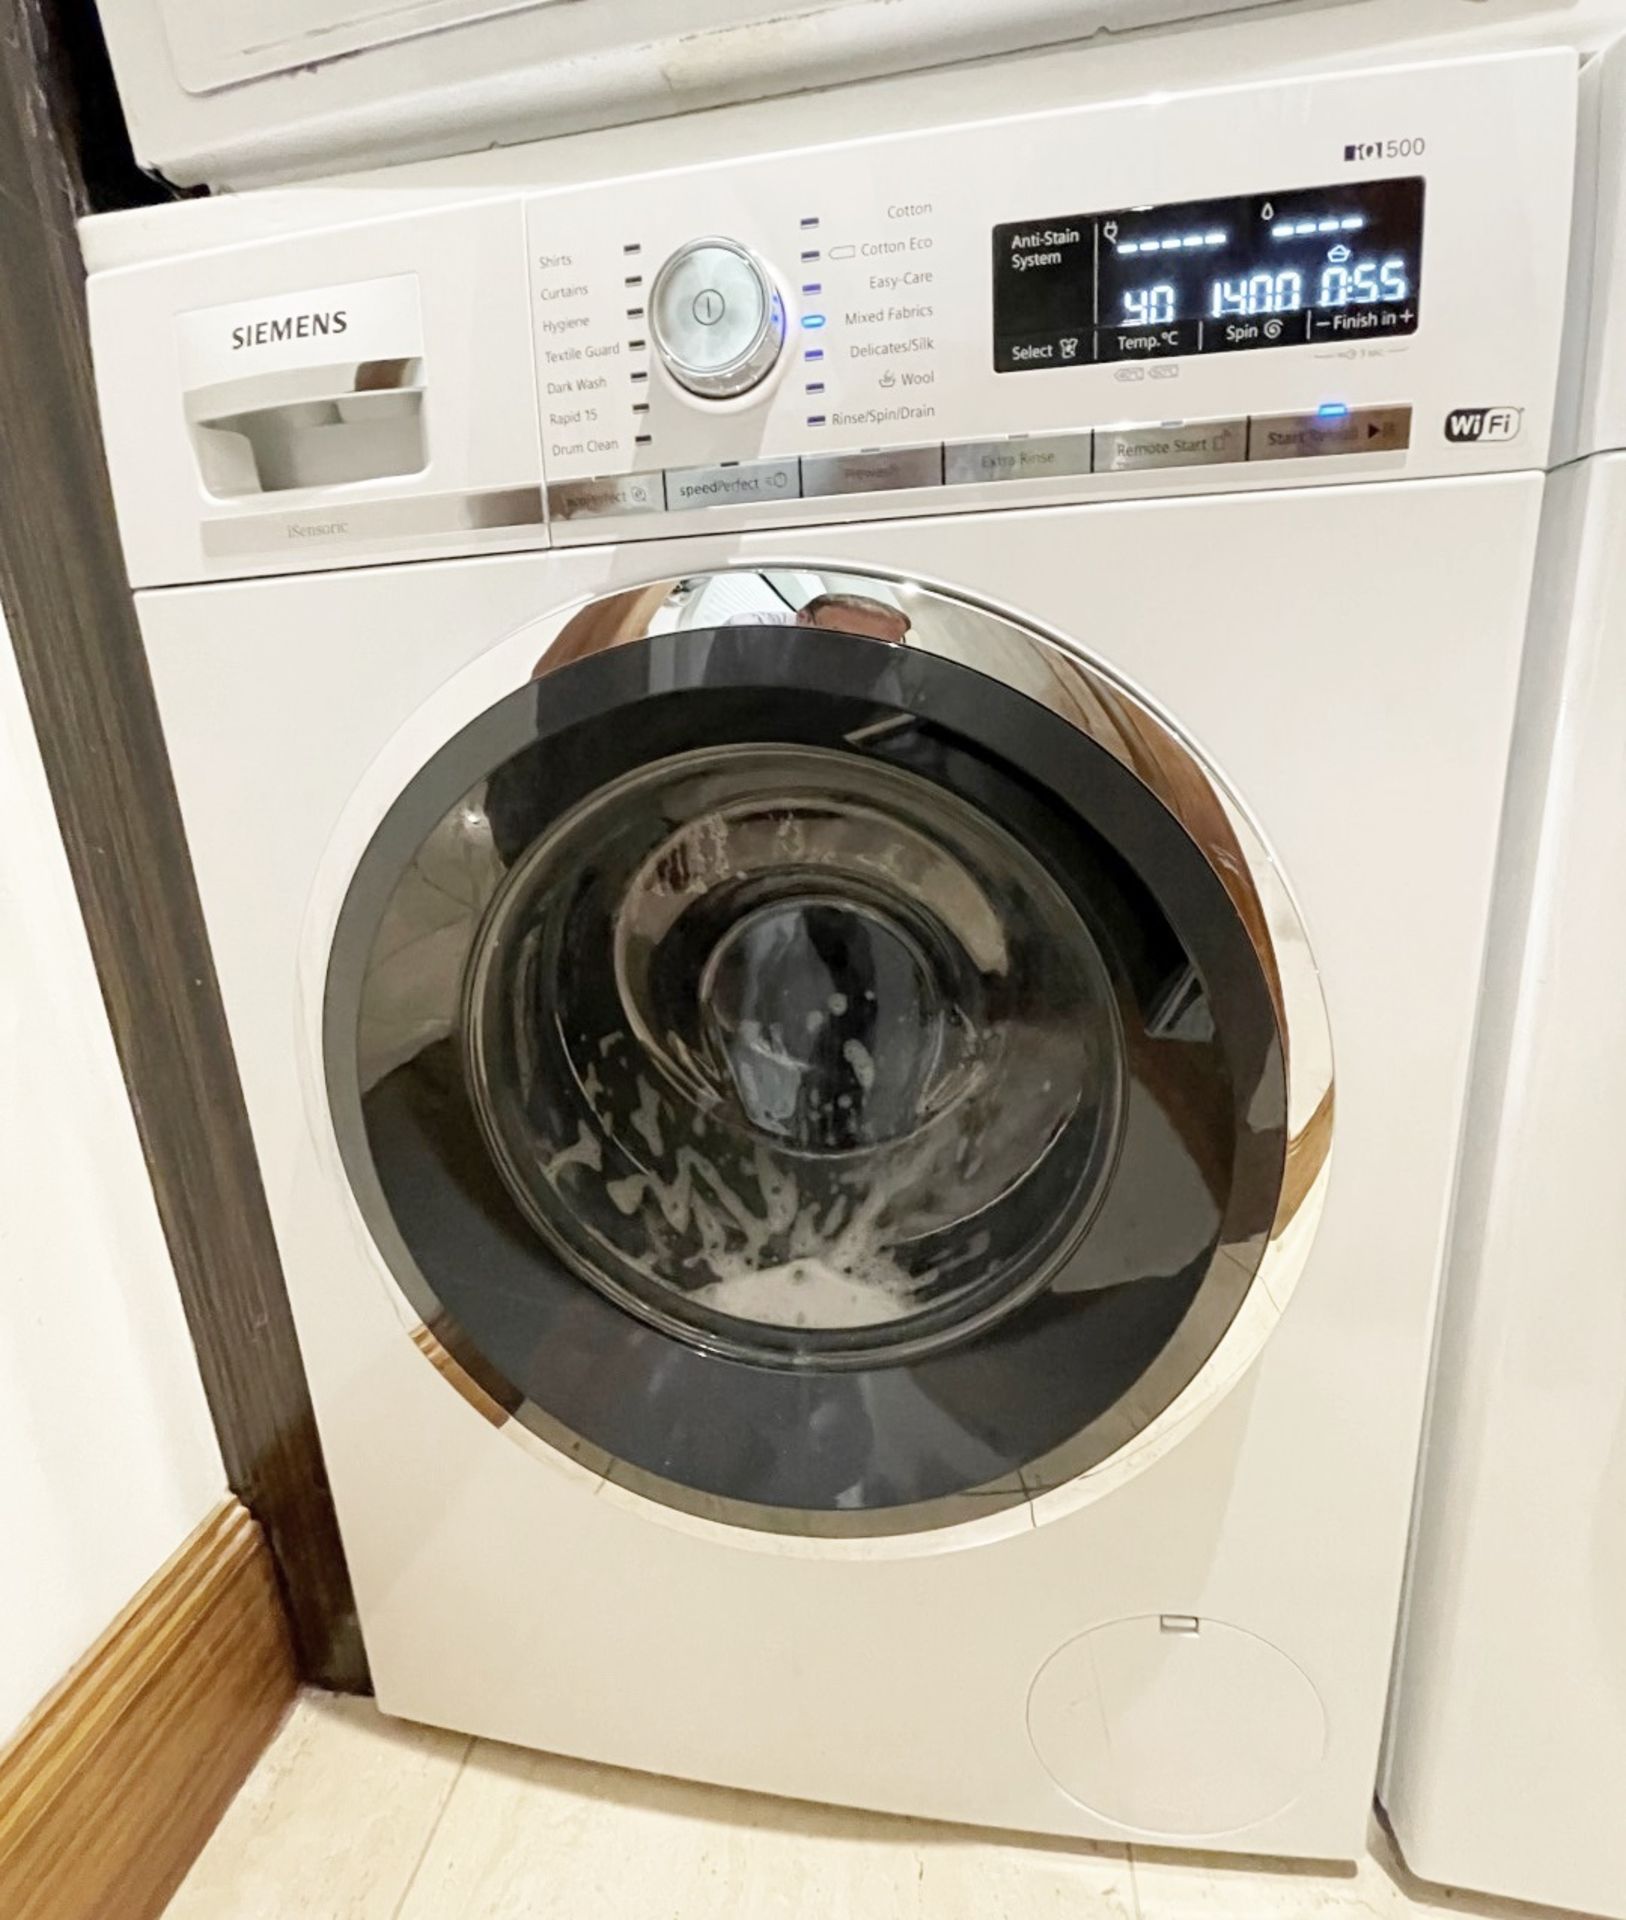 1 x Siemens IQ-500 Integrated 8Kg Washing Machine with 1400 rpm - White - C Rated - Image 2 of 4